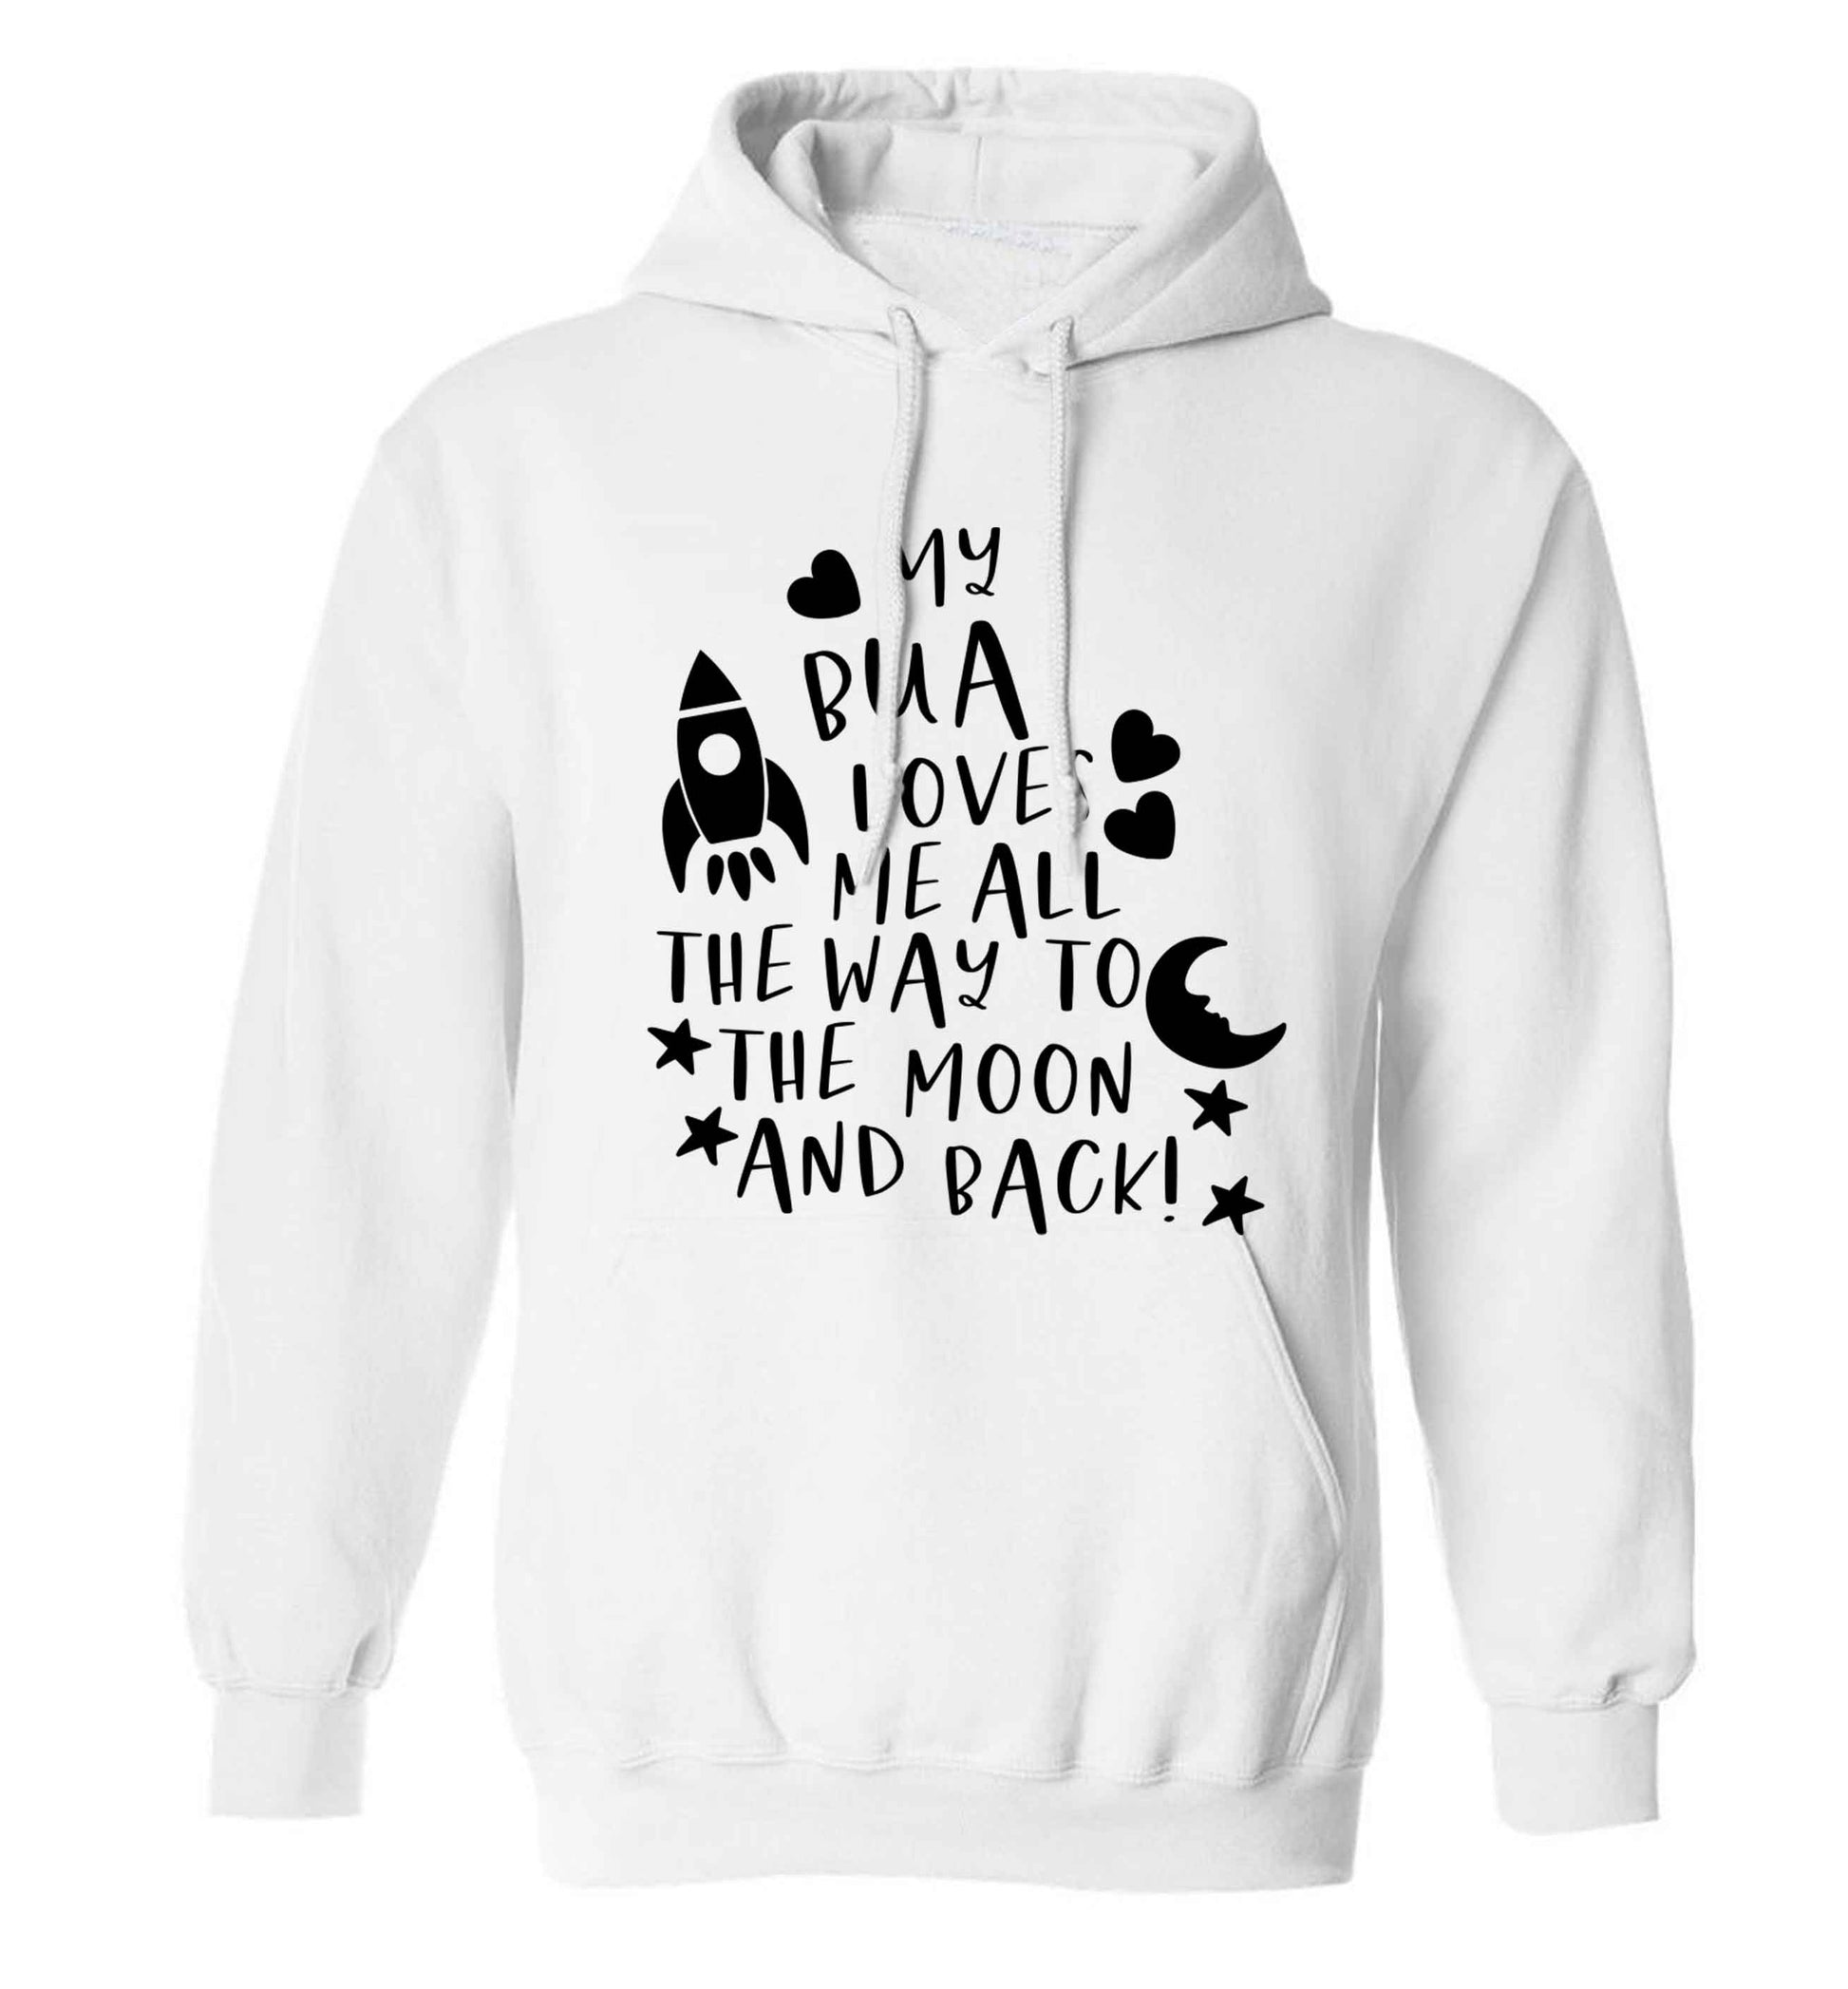 My bua loves me all they way to the moon and back adults unisex white hoodie 2XL